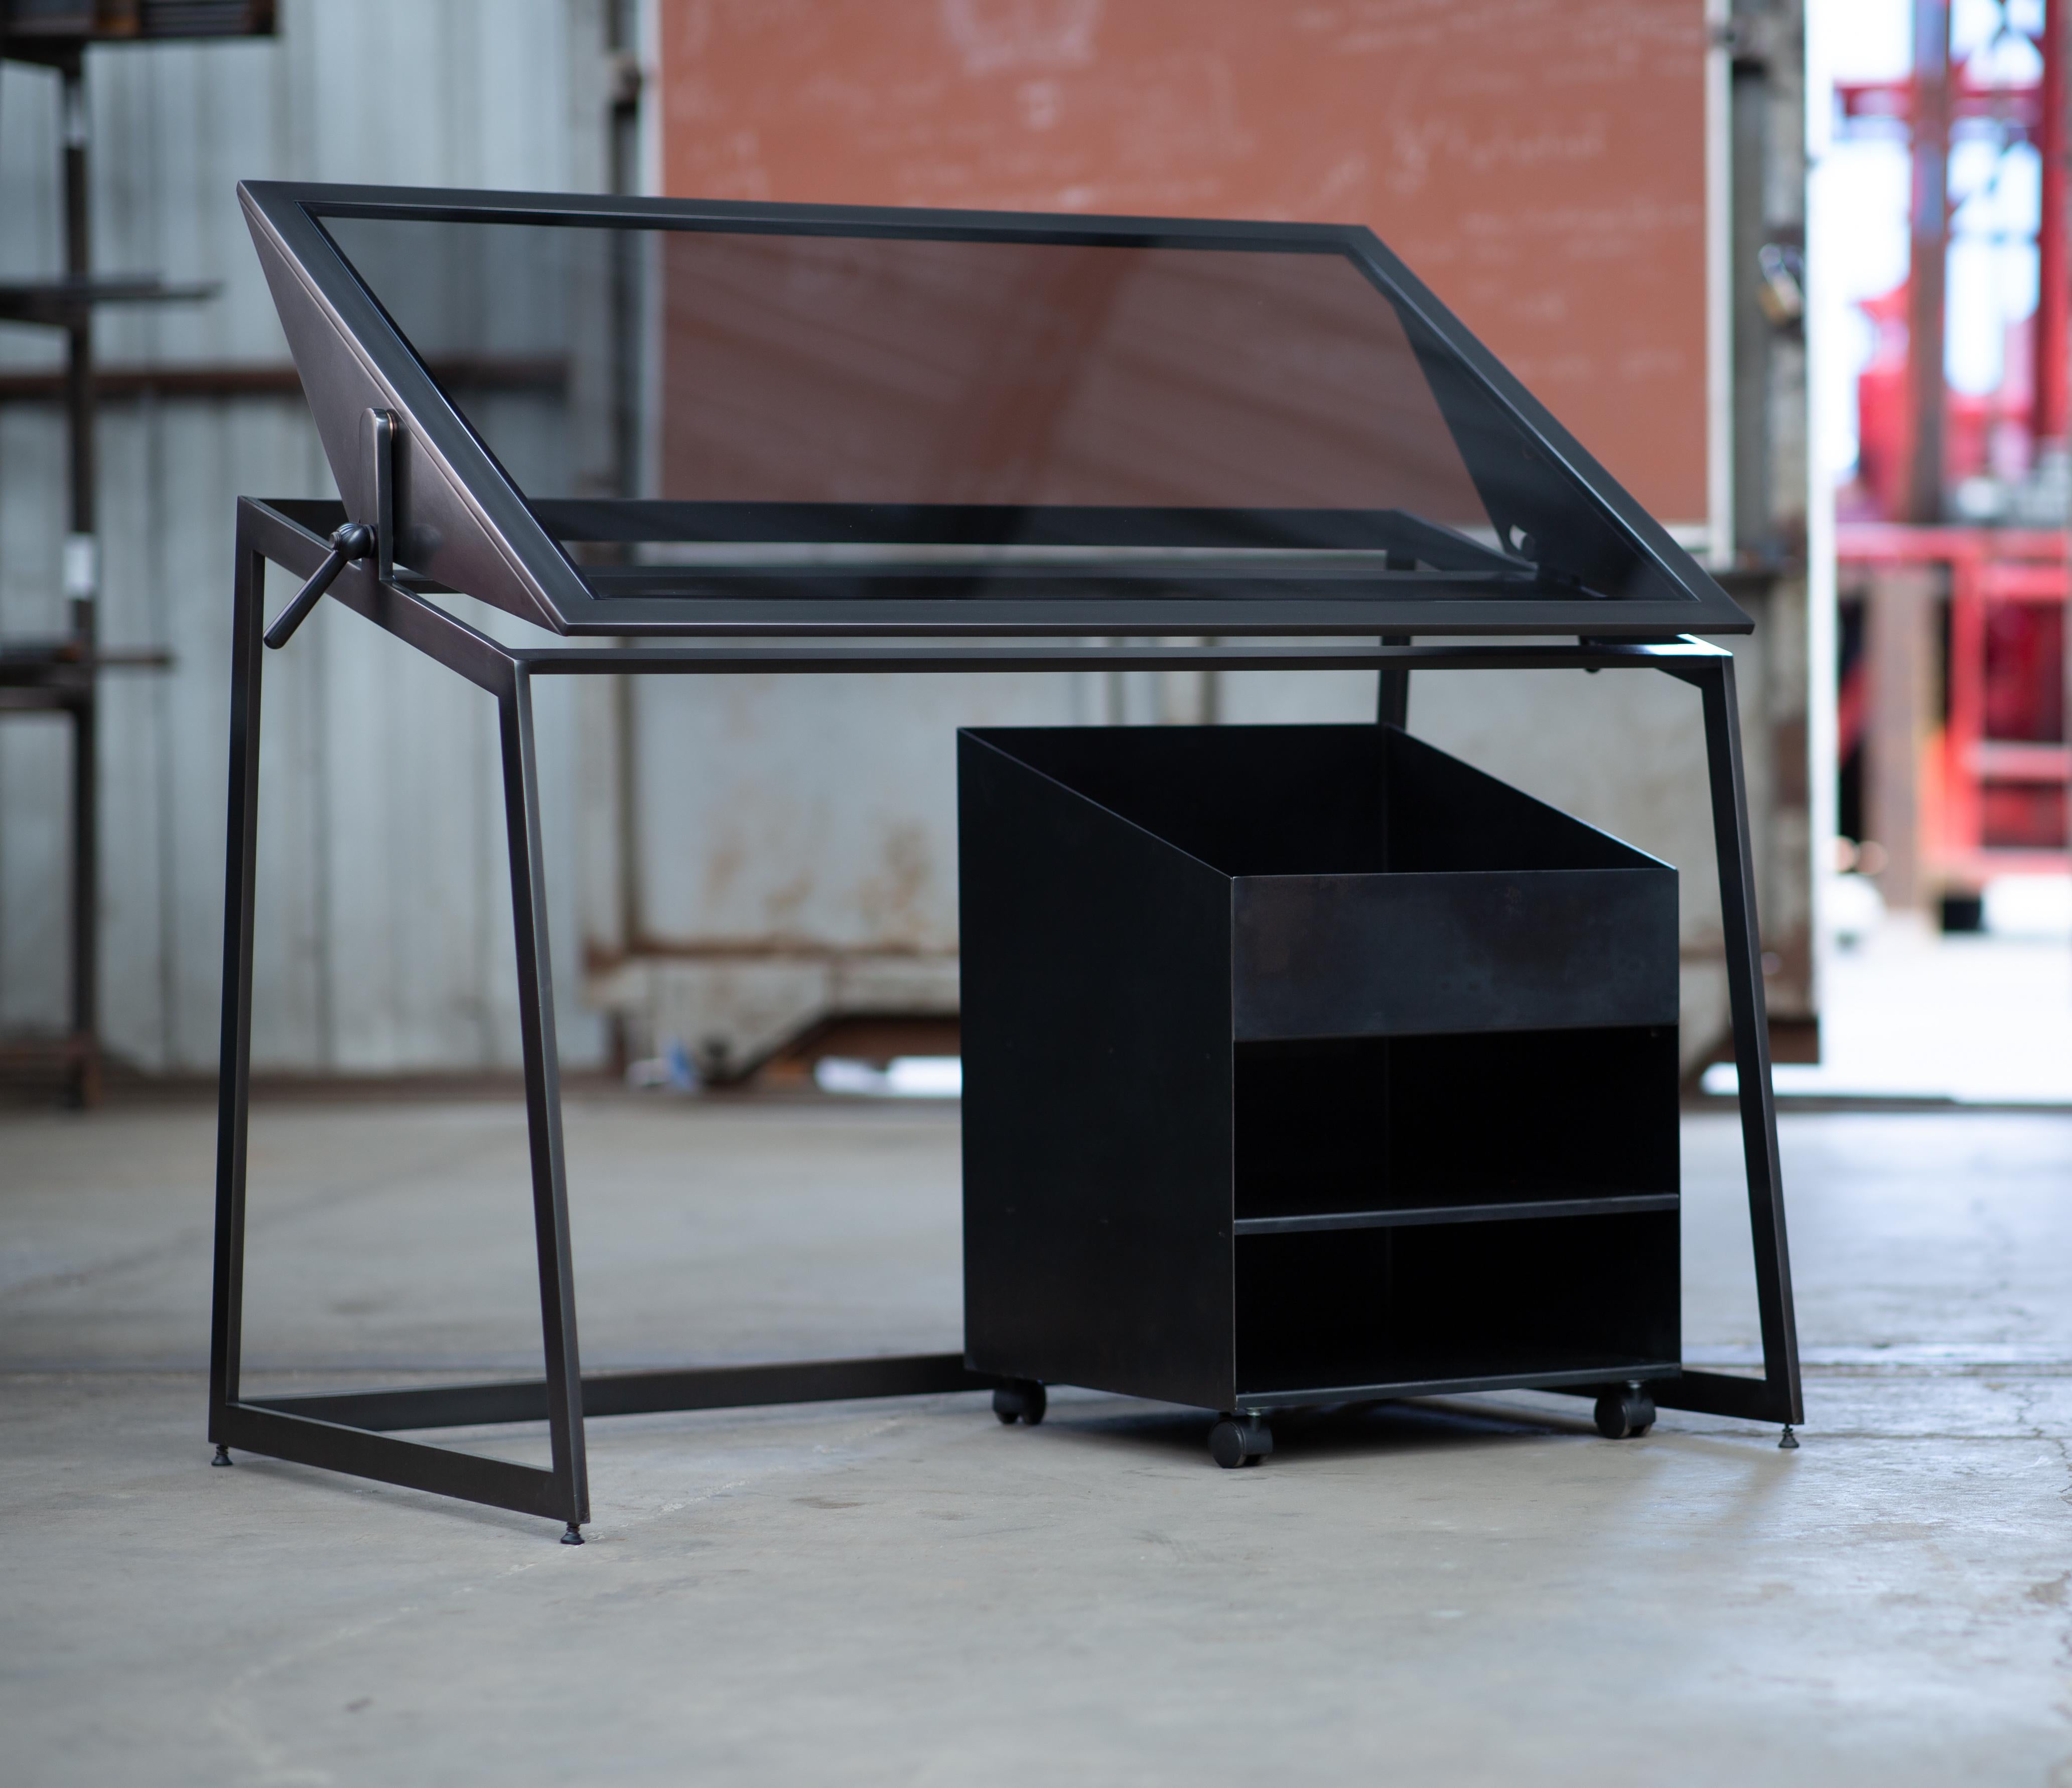 Designed and made-to-order in our Seattle studio with artists, architects, drafters, designers and creatives in mind, the Drafting Table and Utility Cart duo is modern, minimal and sleek. It features a satin black oxide steel framework with a